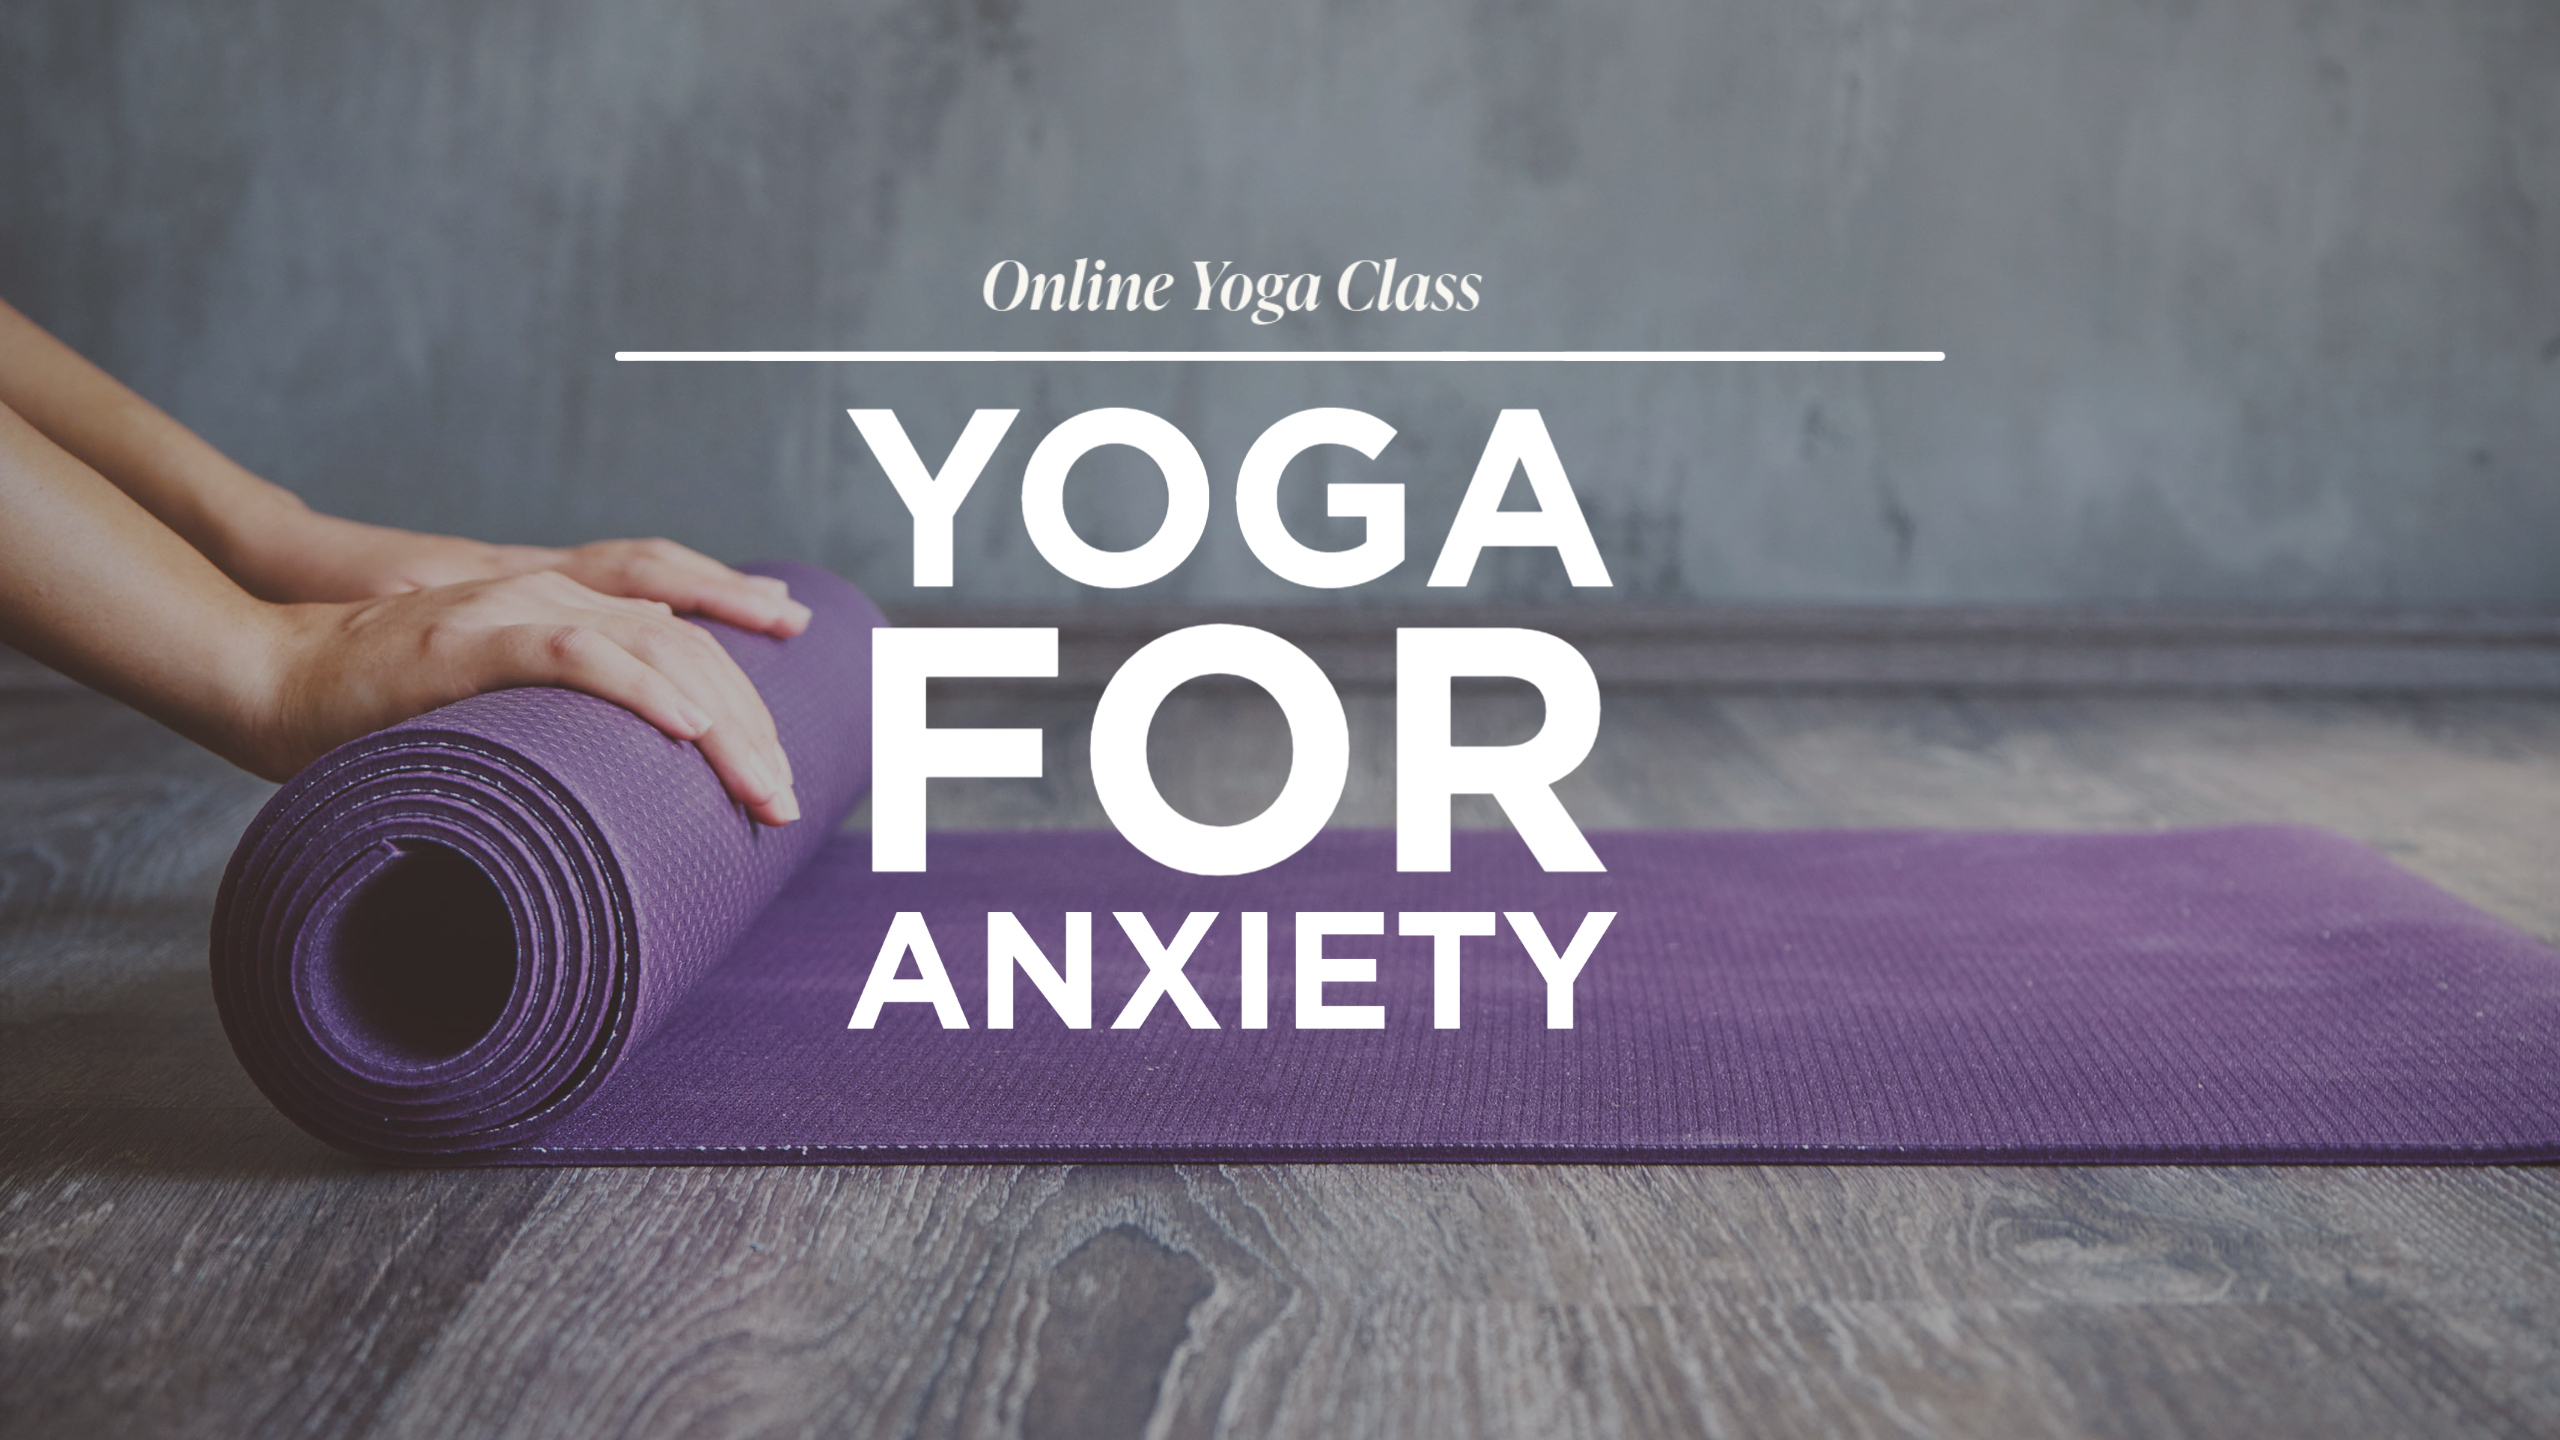 Yoga Class for Anxiety Relief with Erica